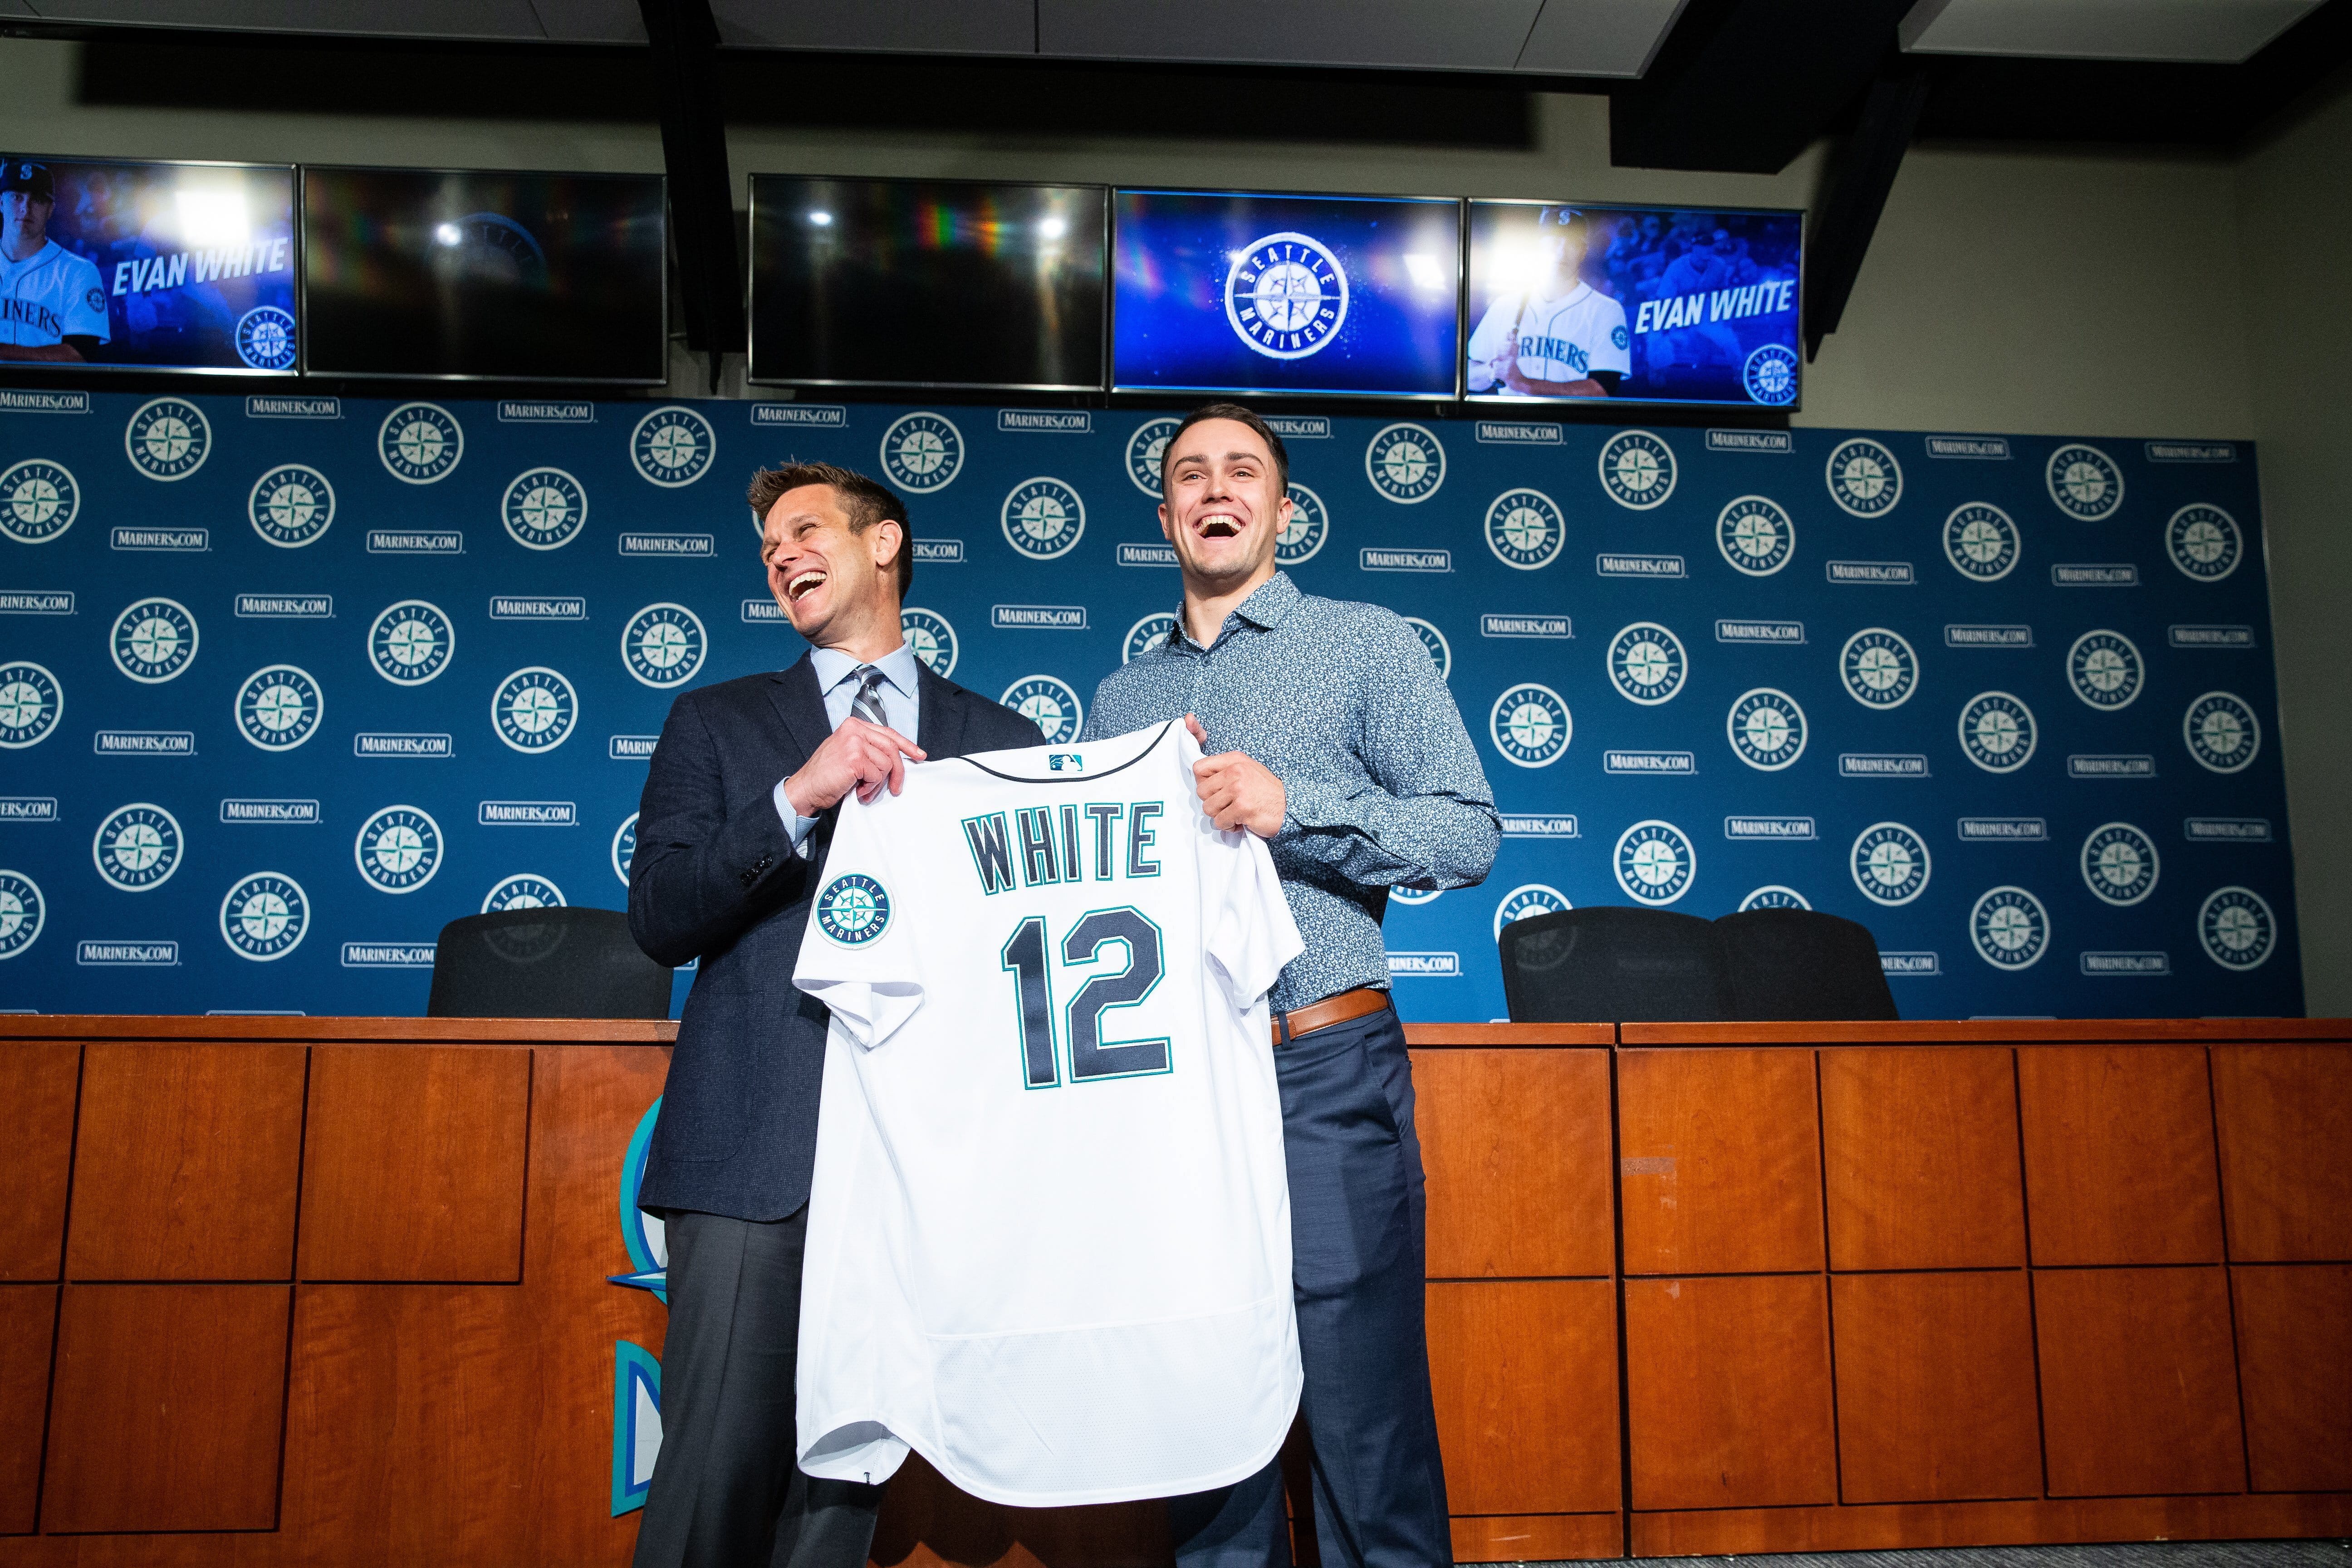 Seattle Mariners general manager Jerry Dipoto, left, and new first baseman Evan White pose for photographs with White's new jersey after a news conference at T-Mobile Park Monday, Nov. 25, 2019 in Seattle.